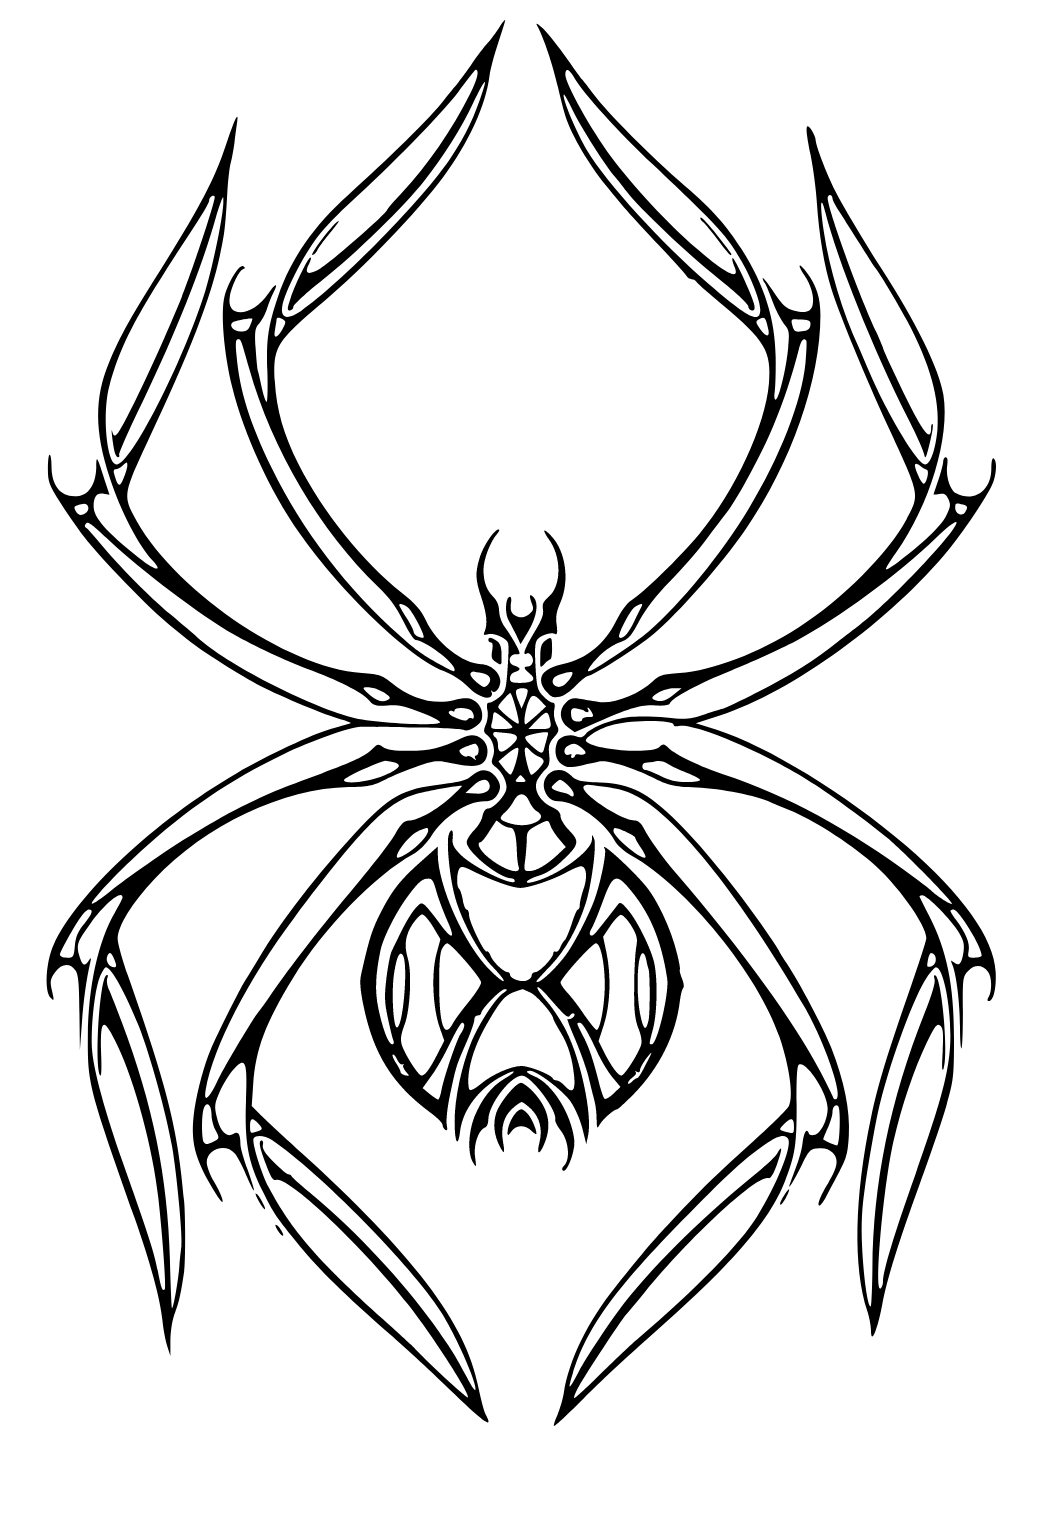 Free printable spider scary coloring page for adults and kids